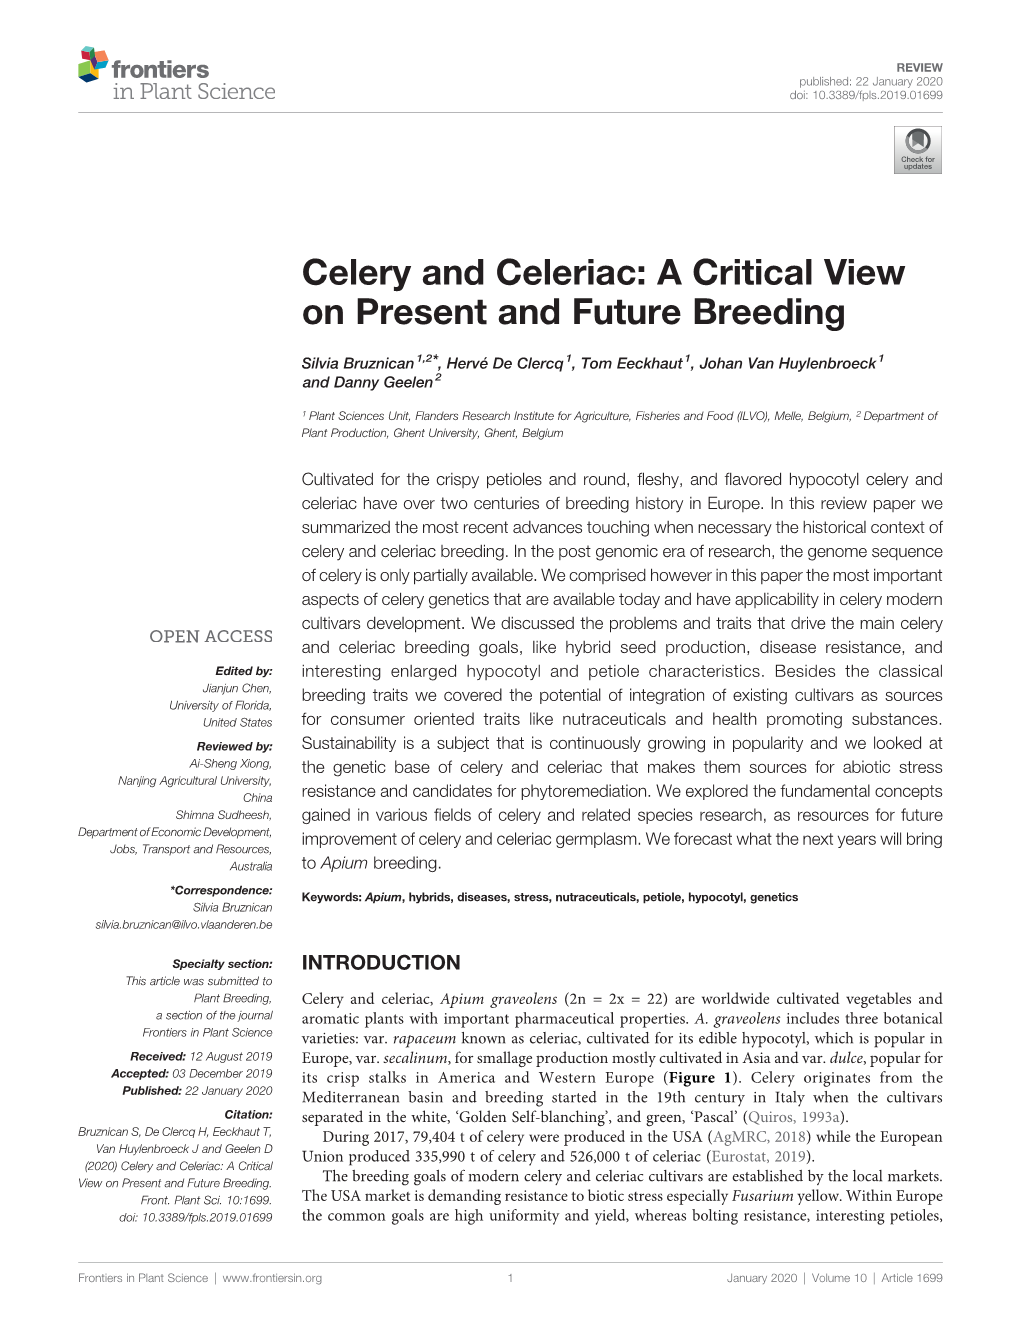 Celery and Celeriac: a Critical View on Present and Future Breeding